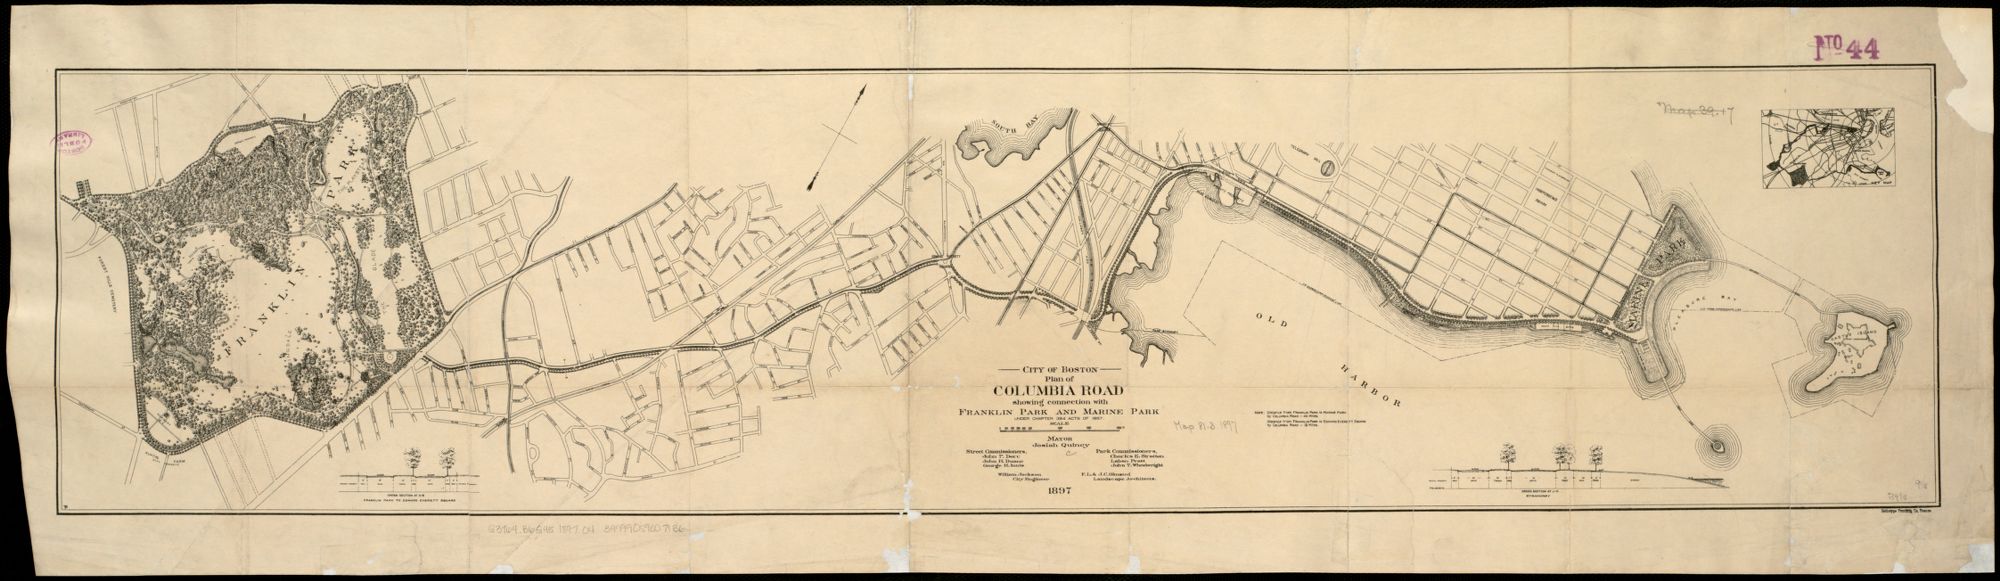 This 1897 plan shows an uncompleted portion of Olmsted&rsquo;s imagined Emerald Necklace.